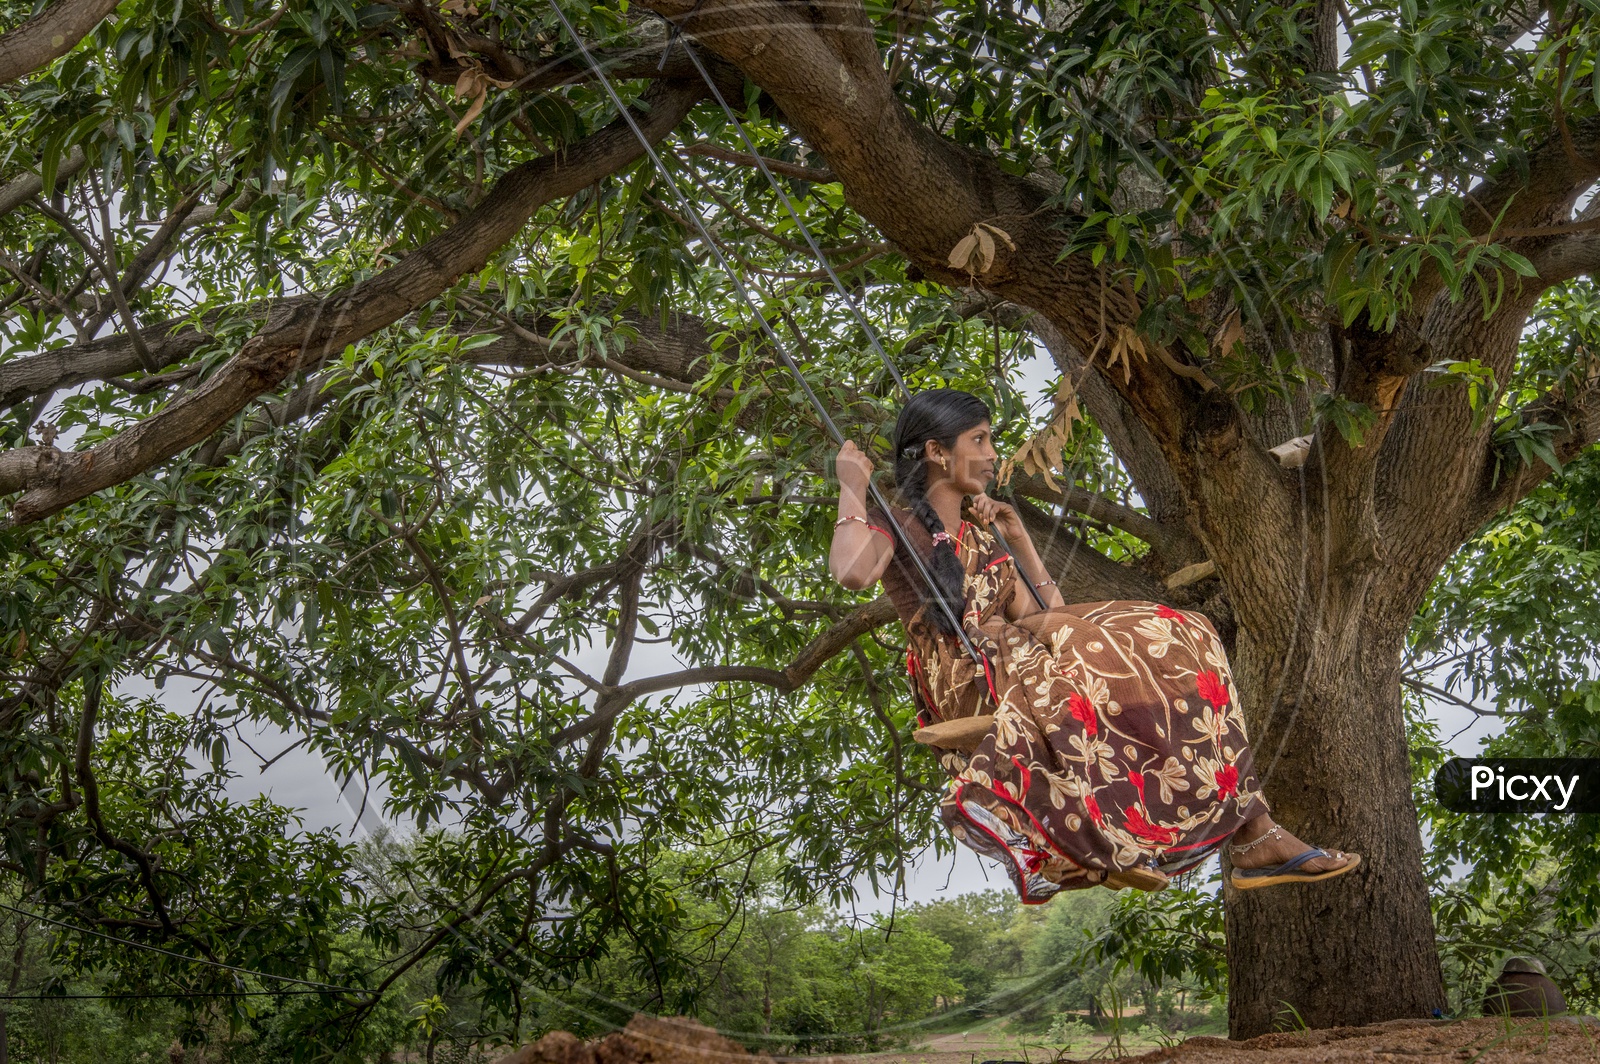 Village girl swinging on a swing made of a Tyre